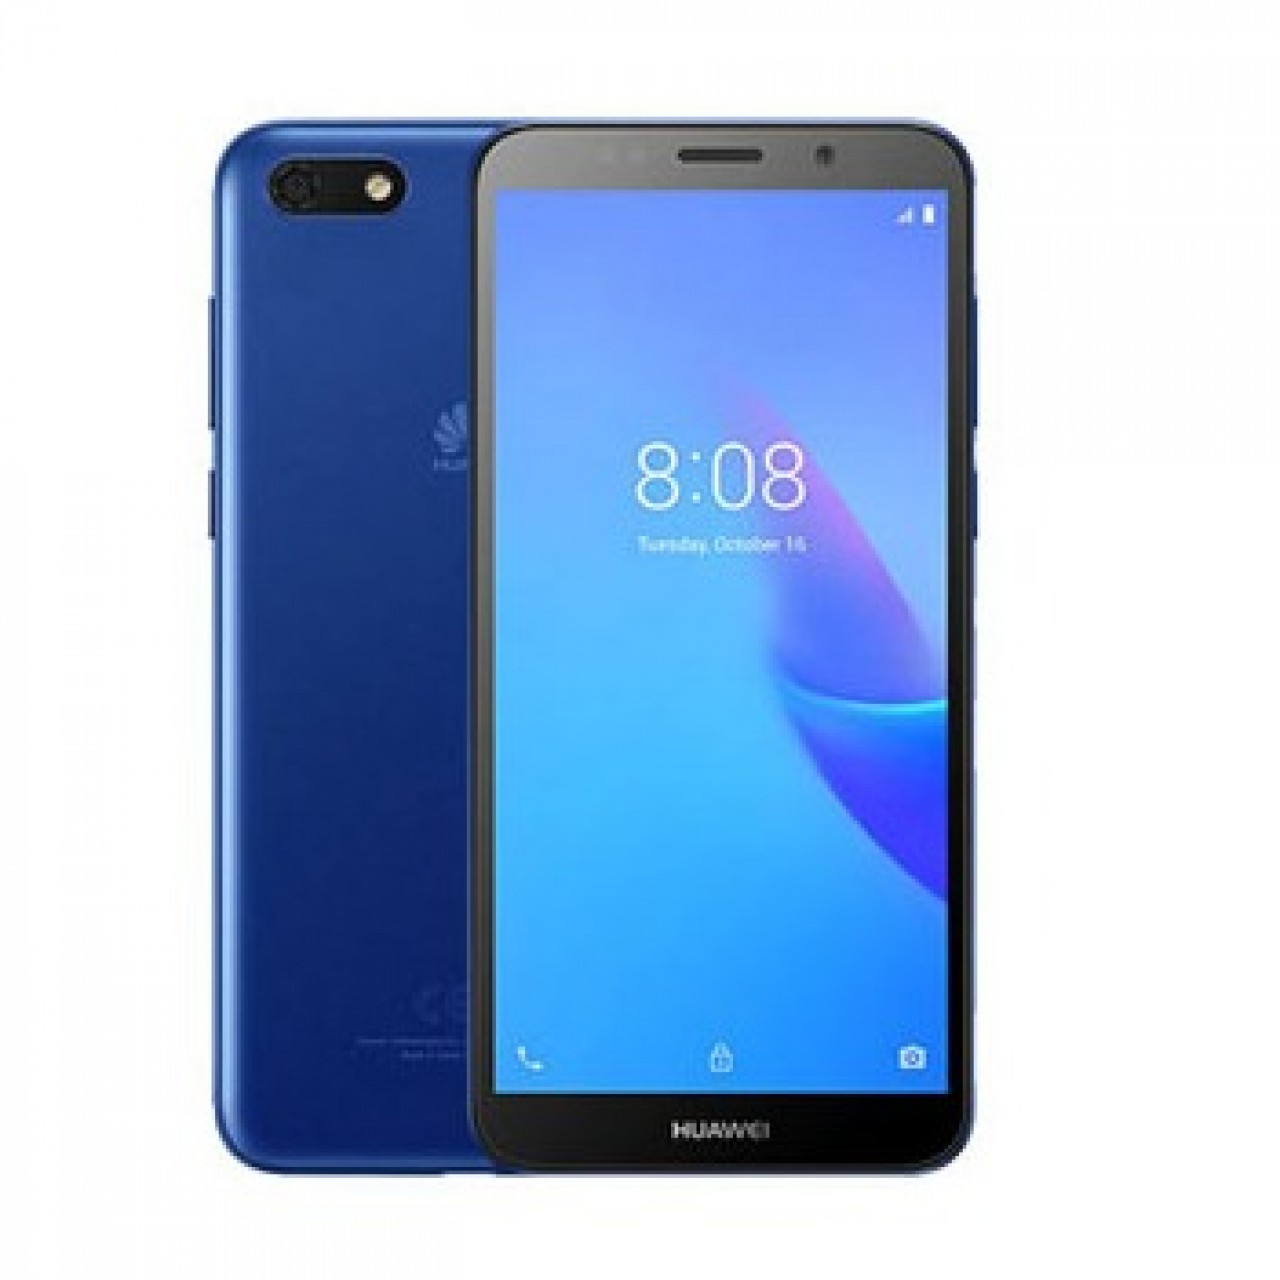 HuaweiY5 Lite - 4G – 8 MP Back & 5 MP Front Camera -  5.45" Screen